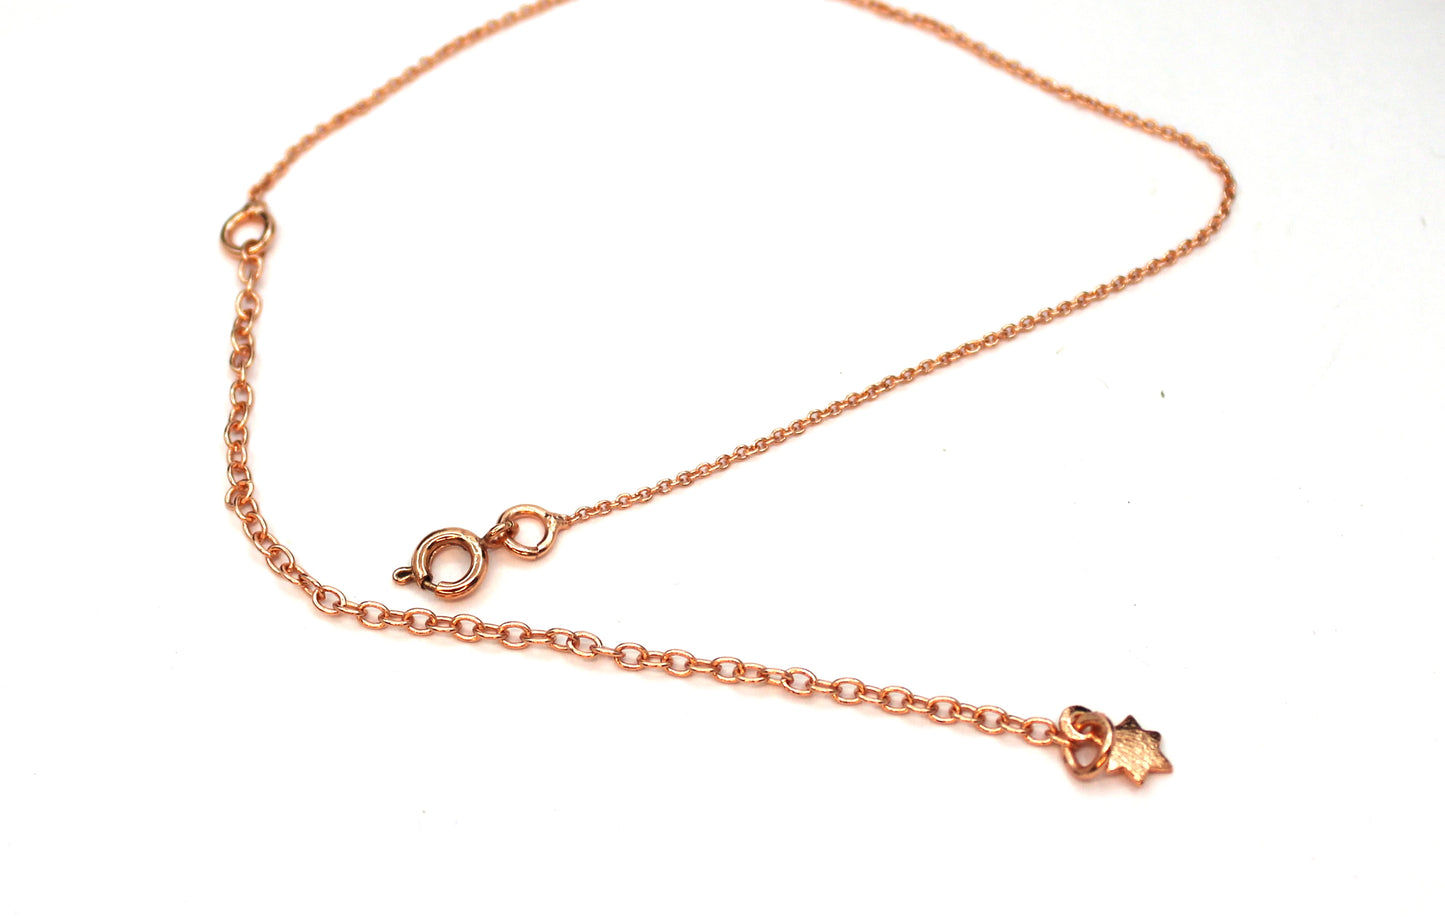 Create Your Own Delicate Charm Necklace